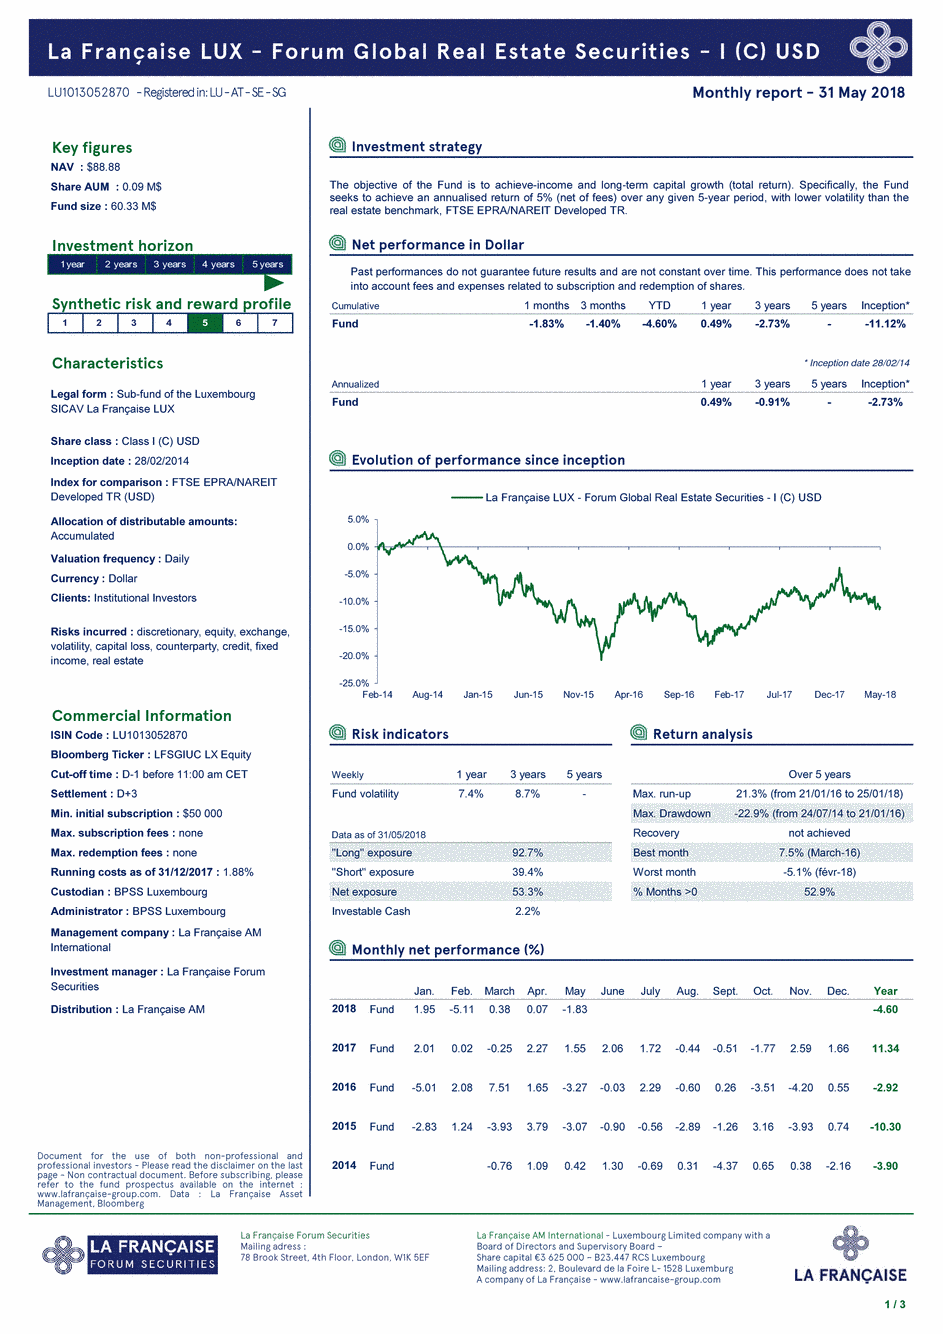 Reporting La Française LUX - Forum Global Real Estate Securities - I (C) USD - 31/05/2018 - Anglais